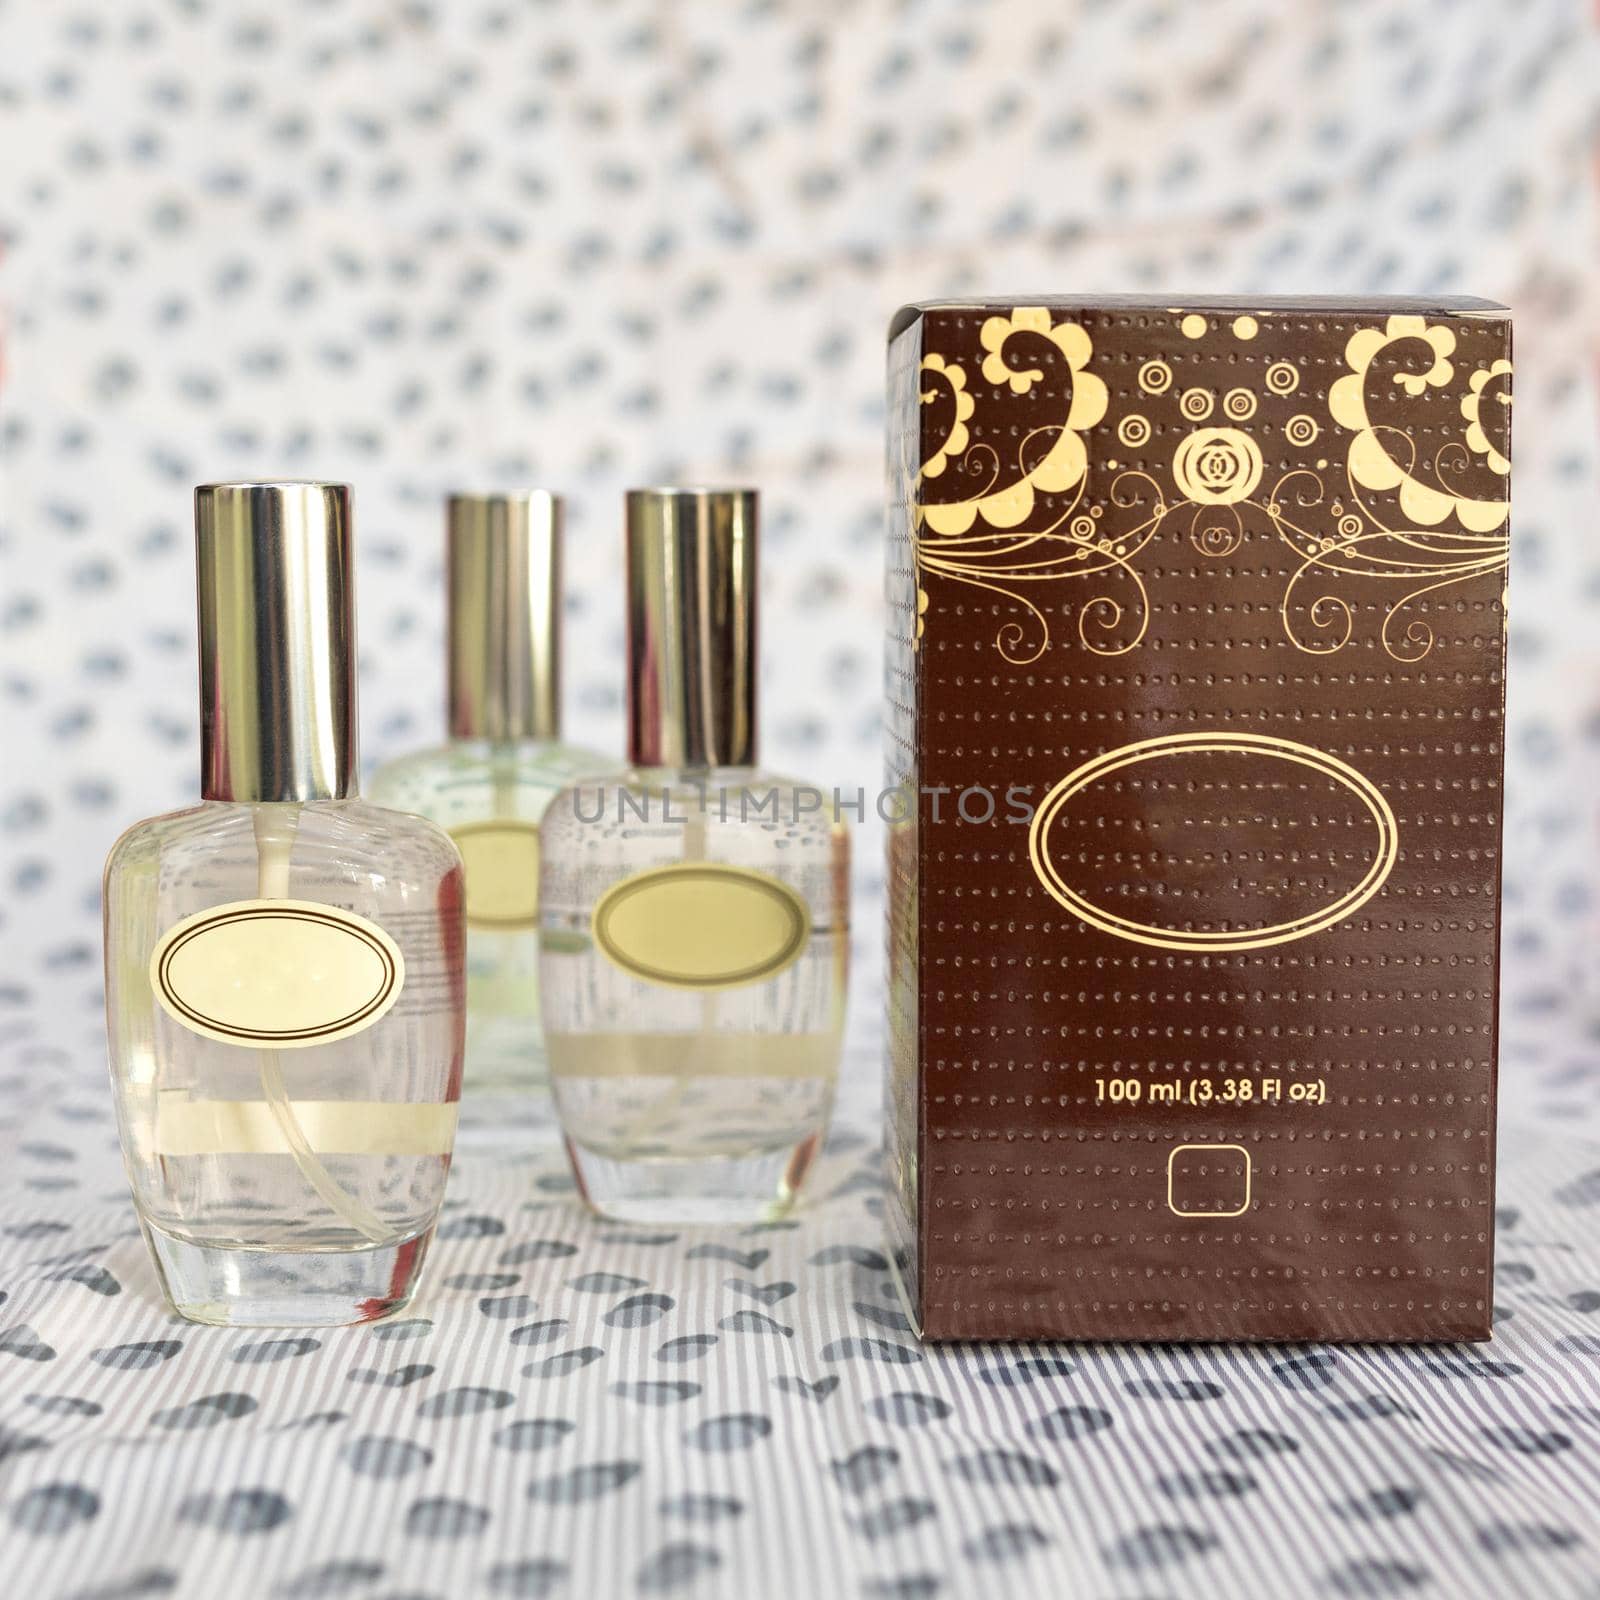 Perfume flacon with box on the white background by ferhad